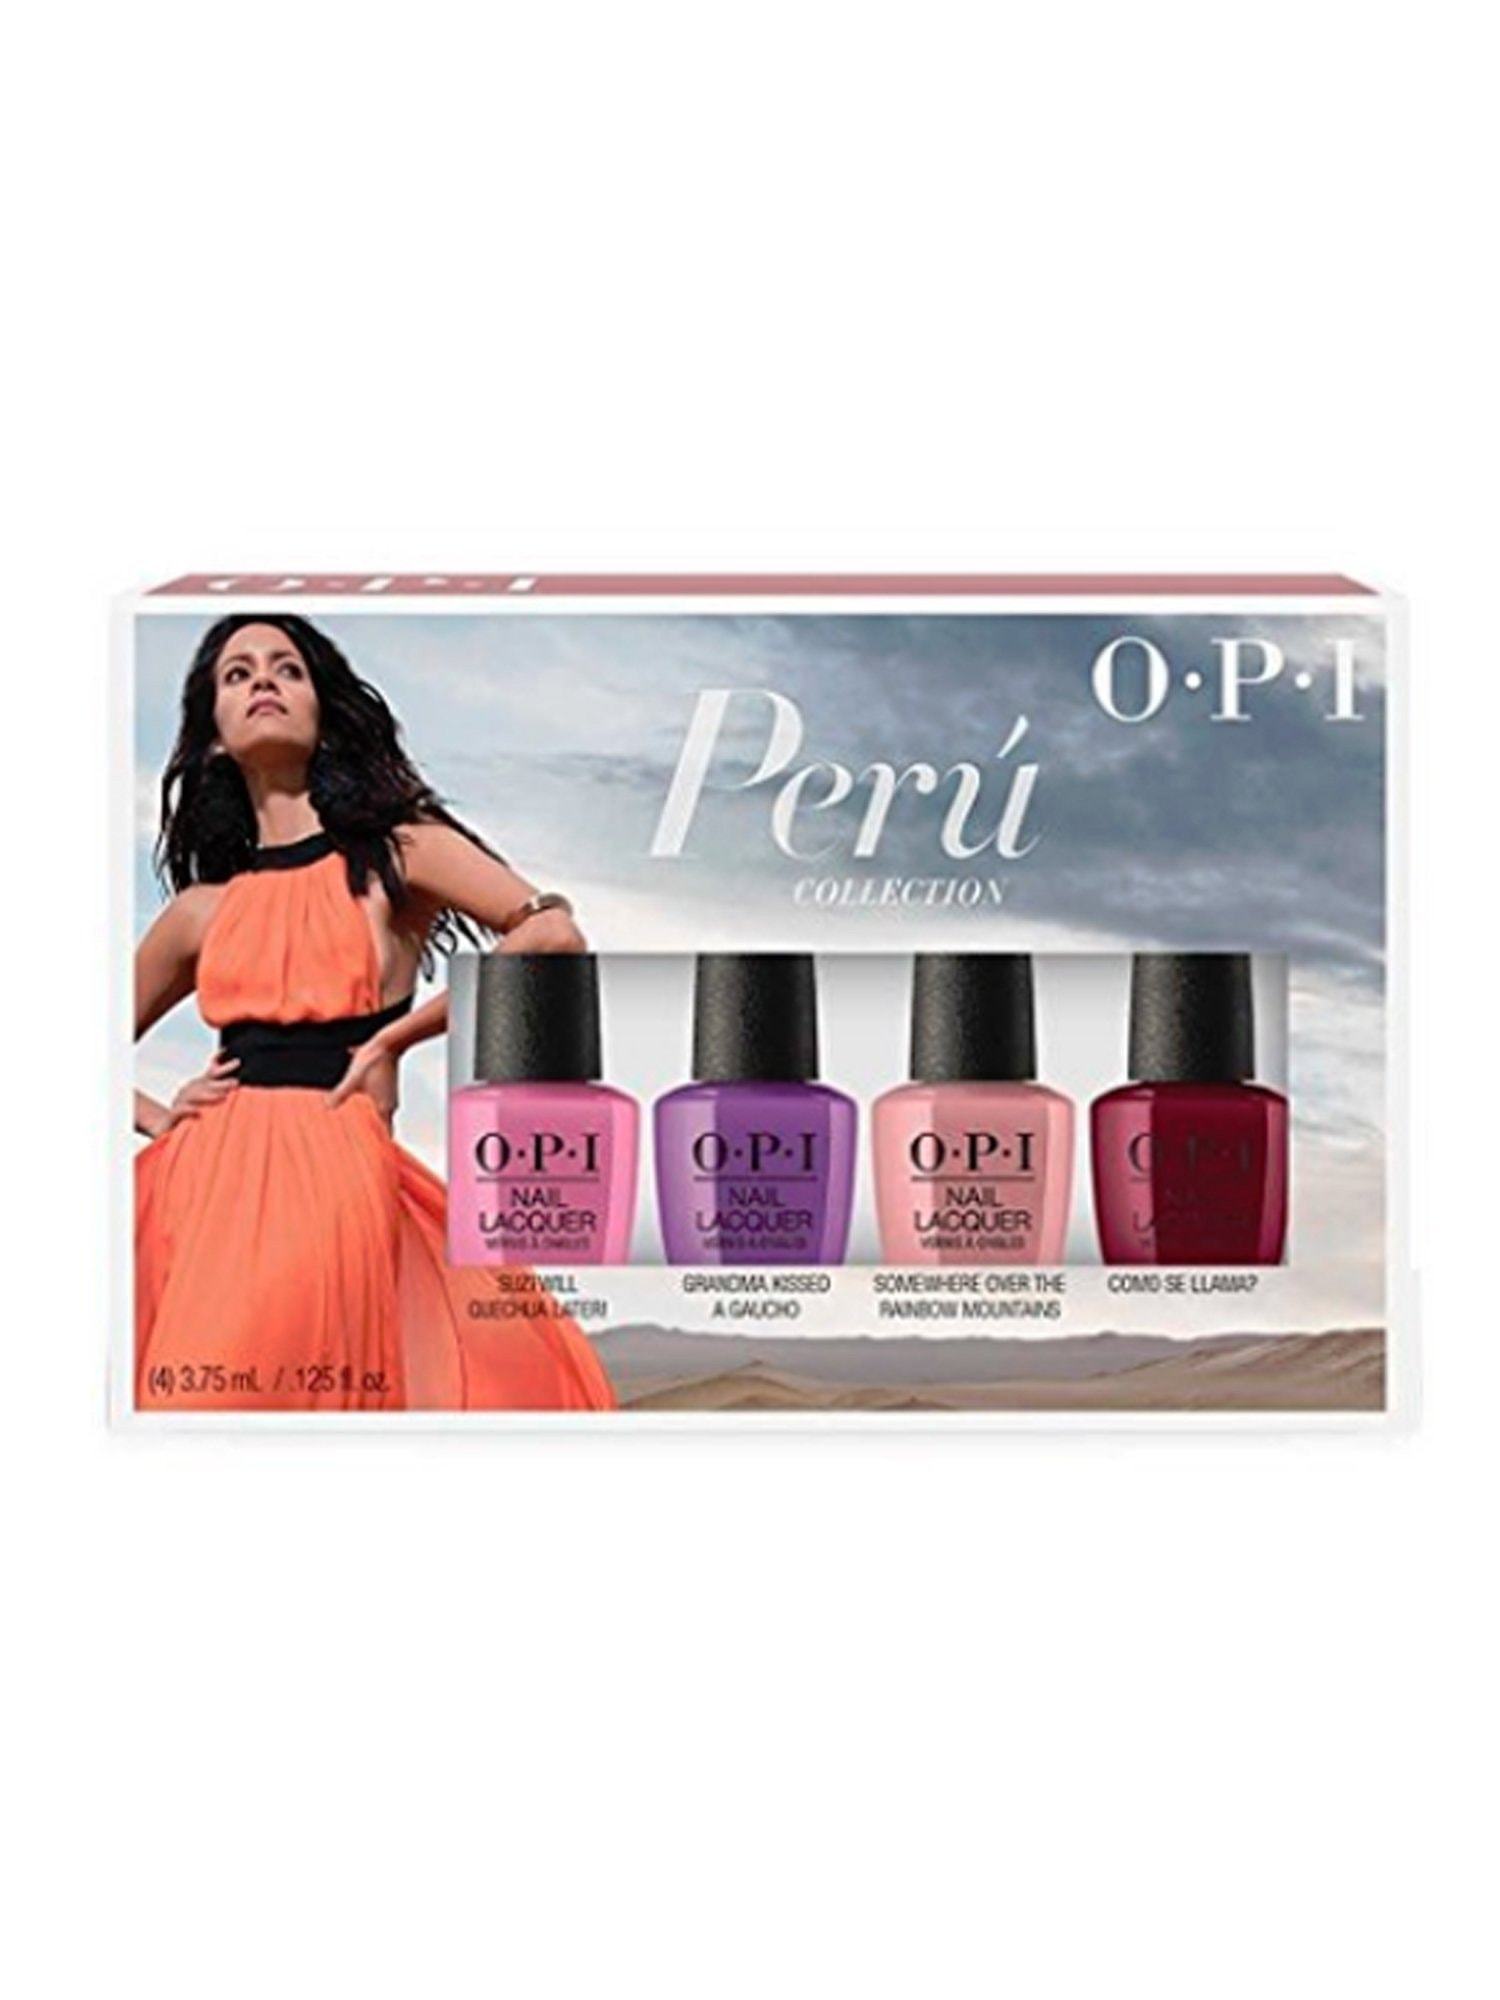 OPI Nail Lacquer Trio Gift Set - Sweet Heart, Big Apple Red, Lincoln Park  After Dark - FREE Delivery